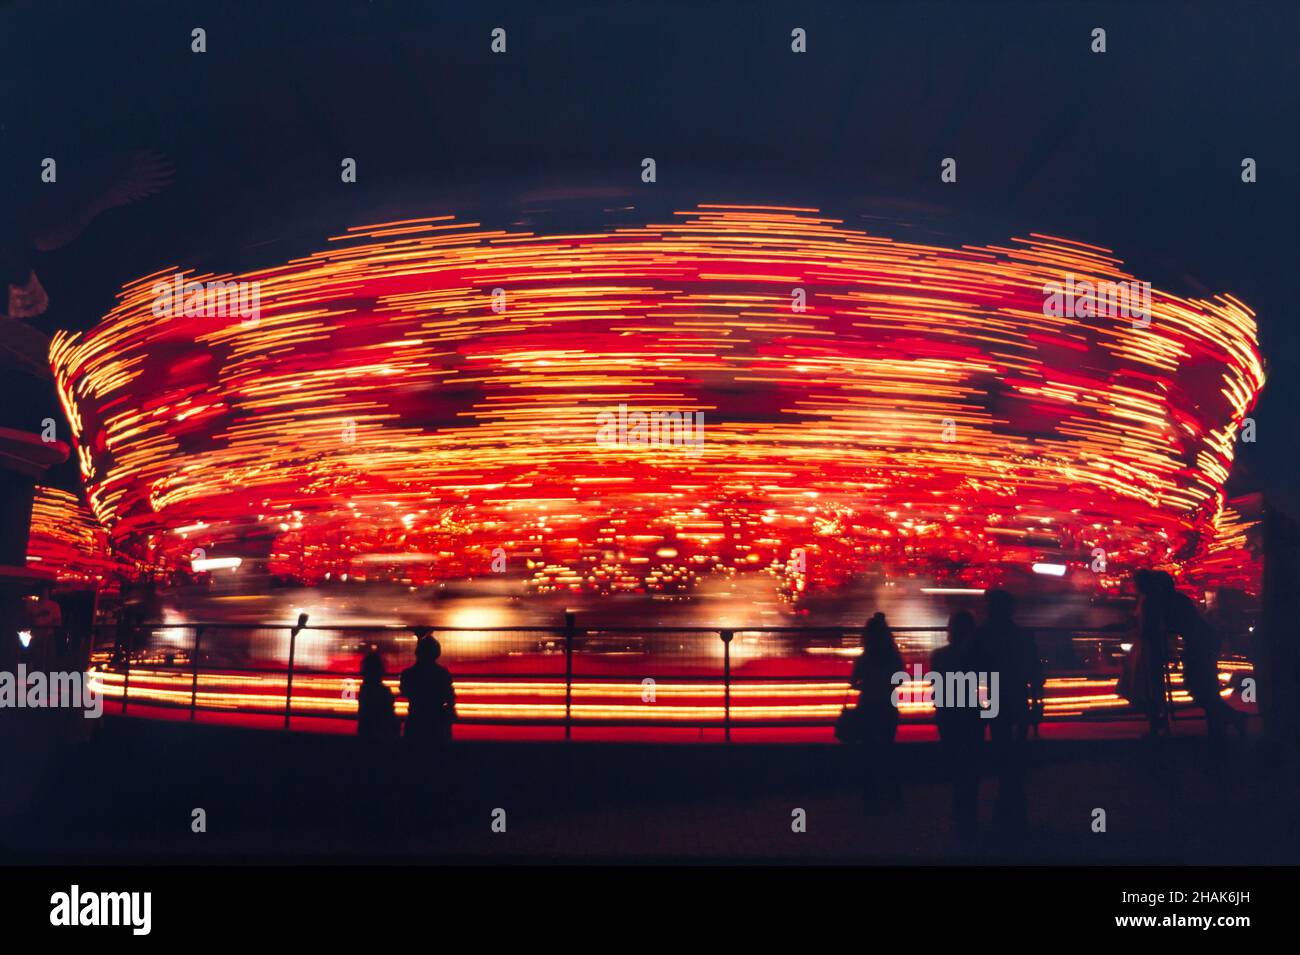 A whirling merry-to-round amusement ride spinning in bright colors at night. Stock Photo